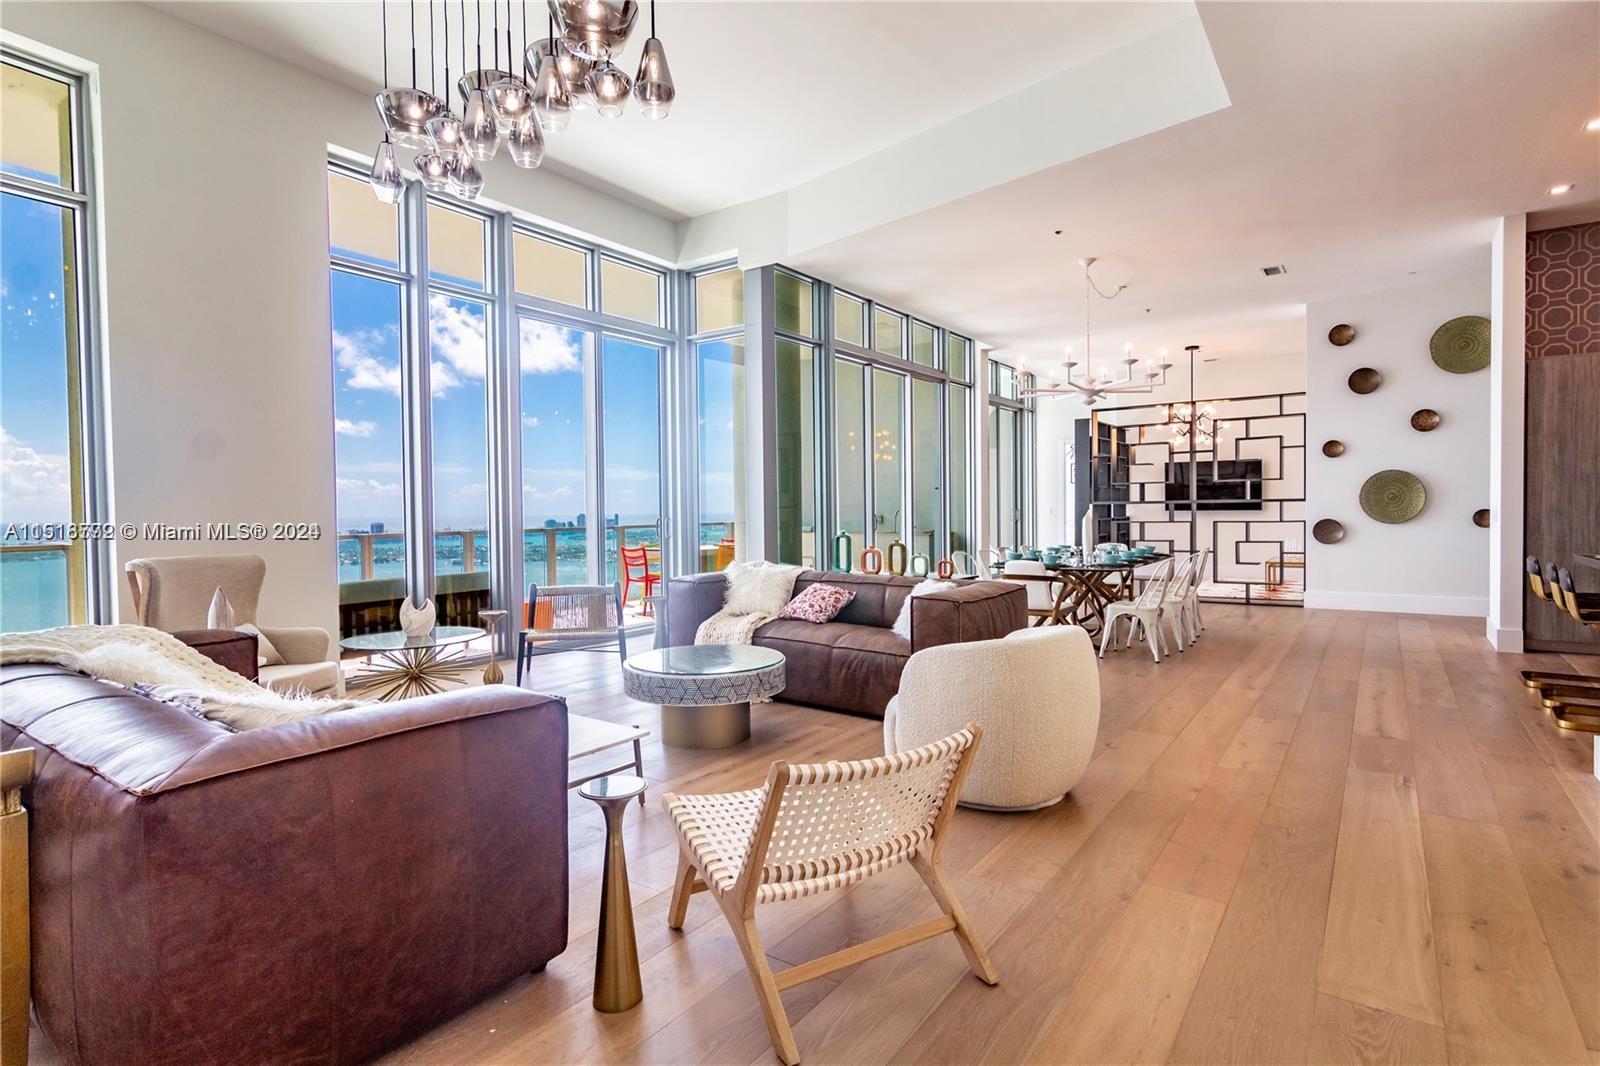 Spectacular 5 bedroom penthouse at the Biscayne Beach condominium. Fully furnished turn key. Incredi